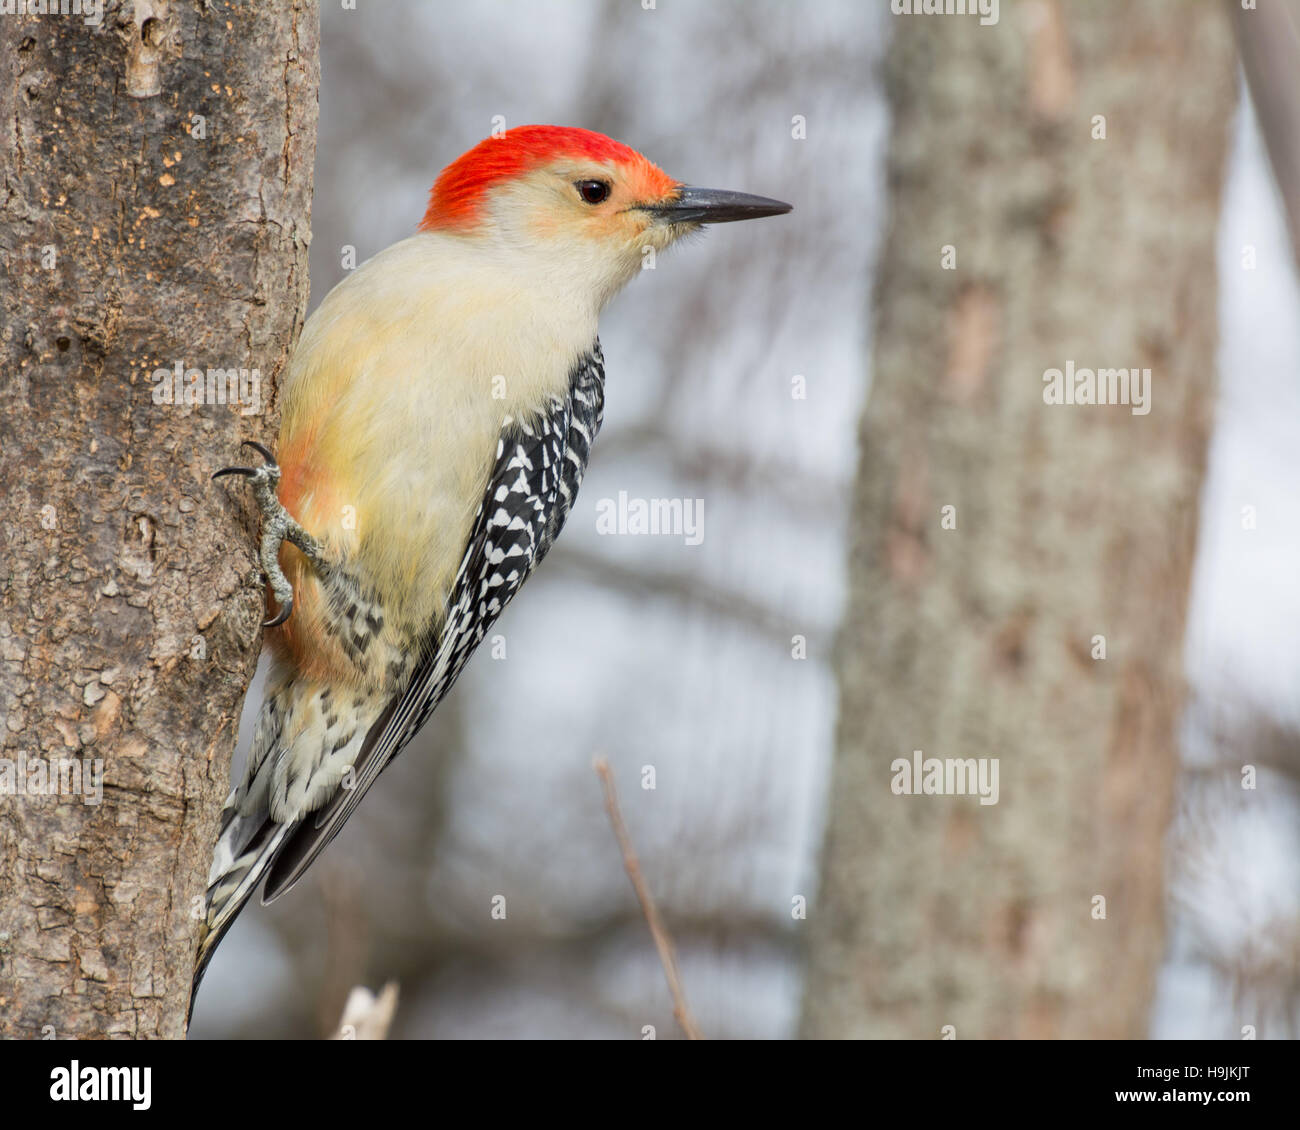 Male red-bellied woodpecker eating bird seed on a tree. Stock Photo